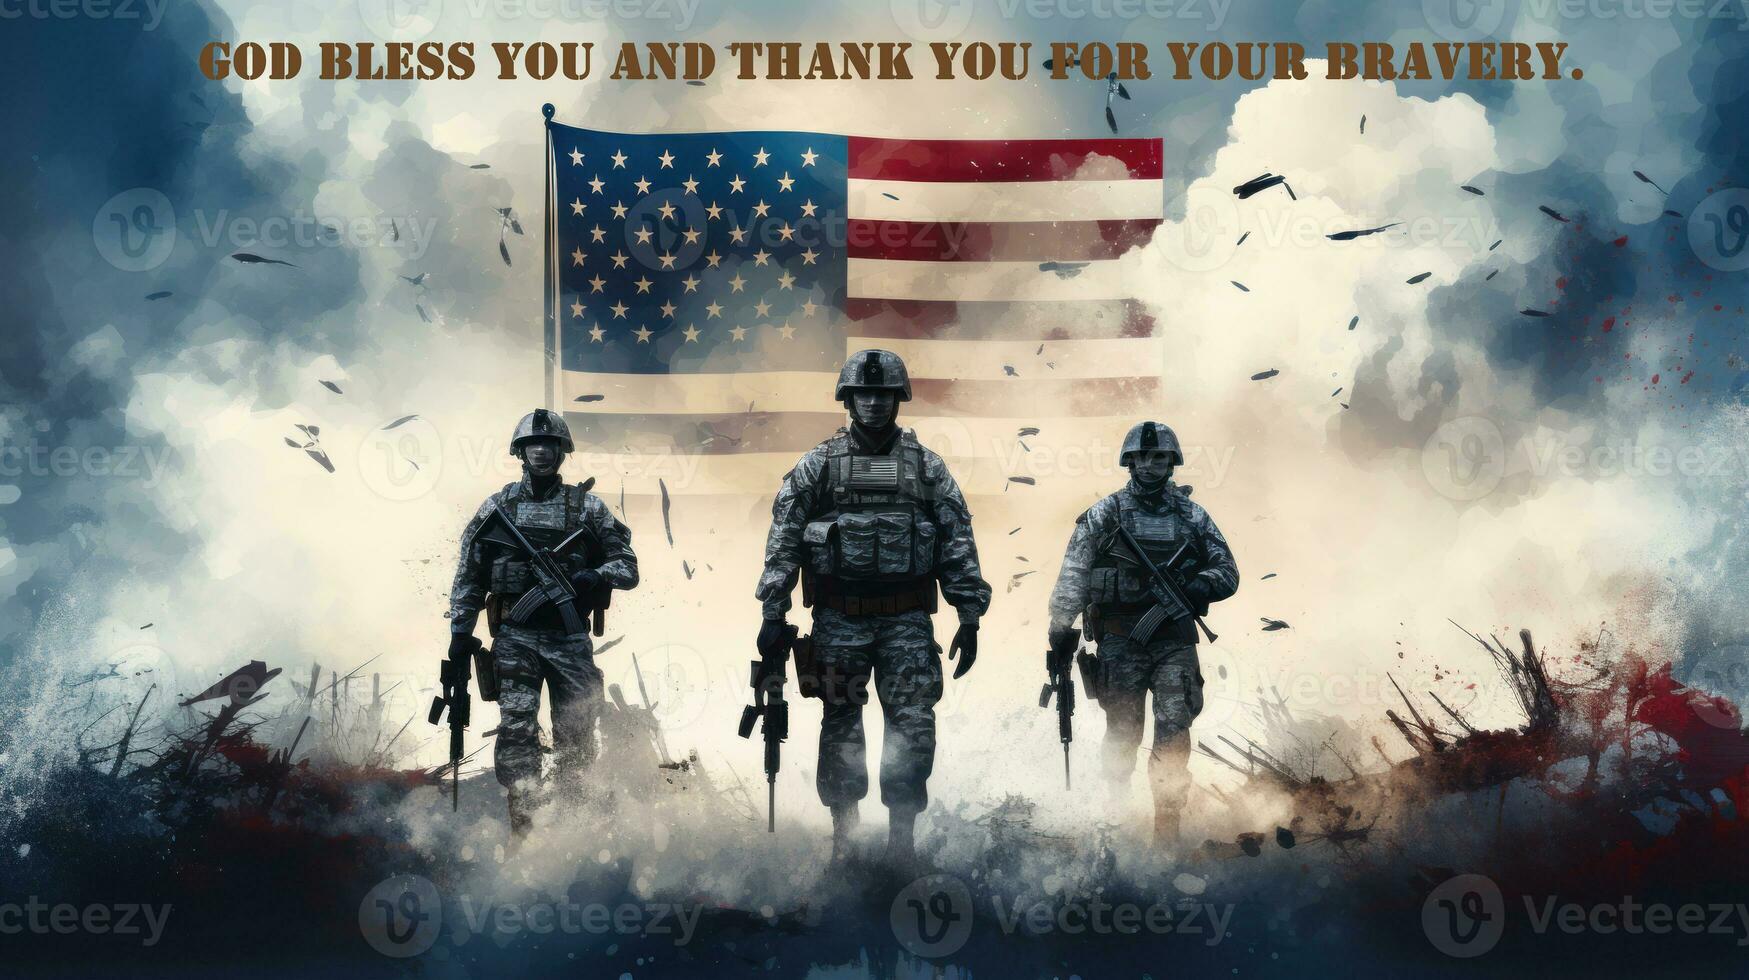 God bless you and thank you for your bravery. photo